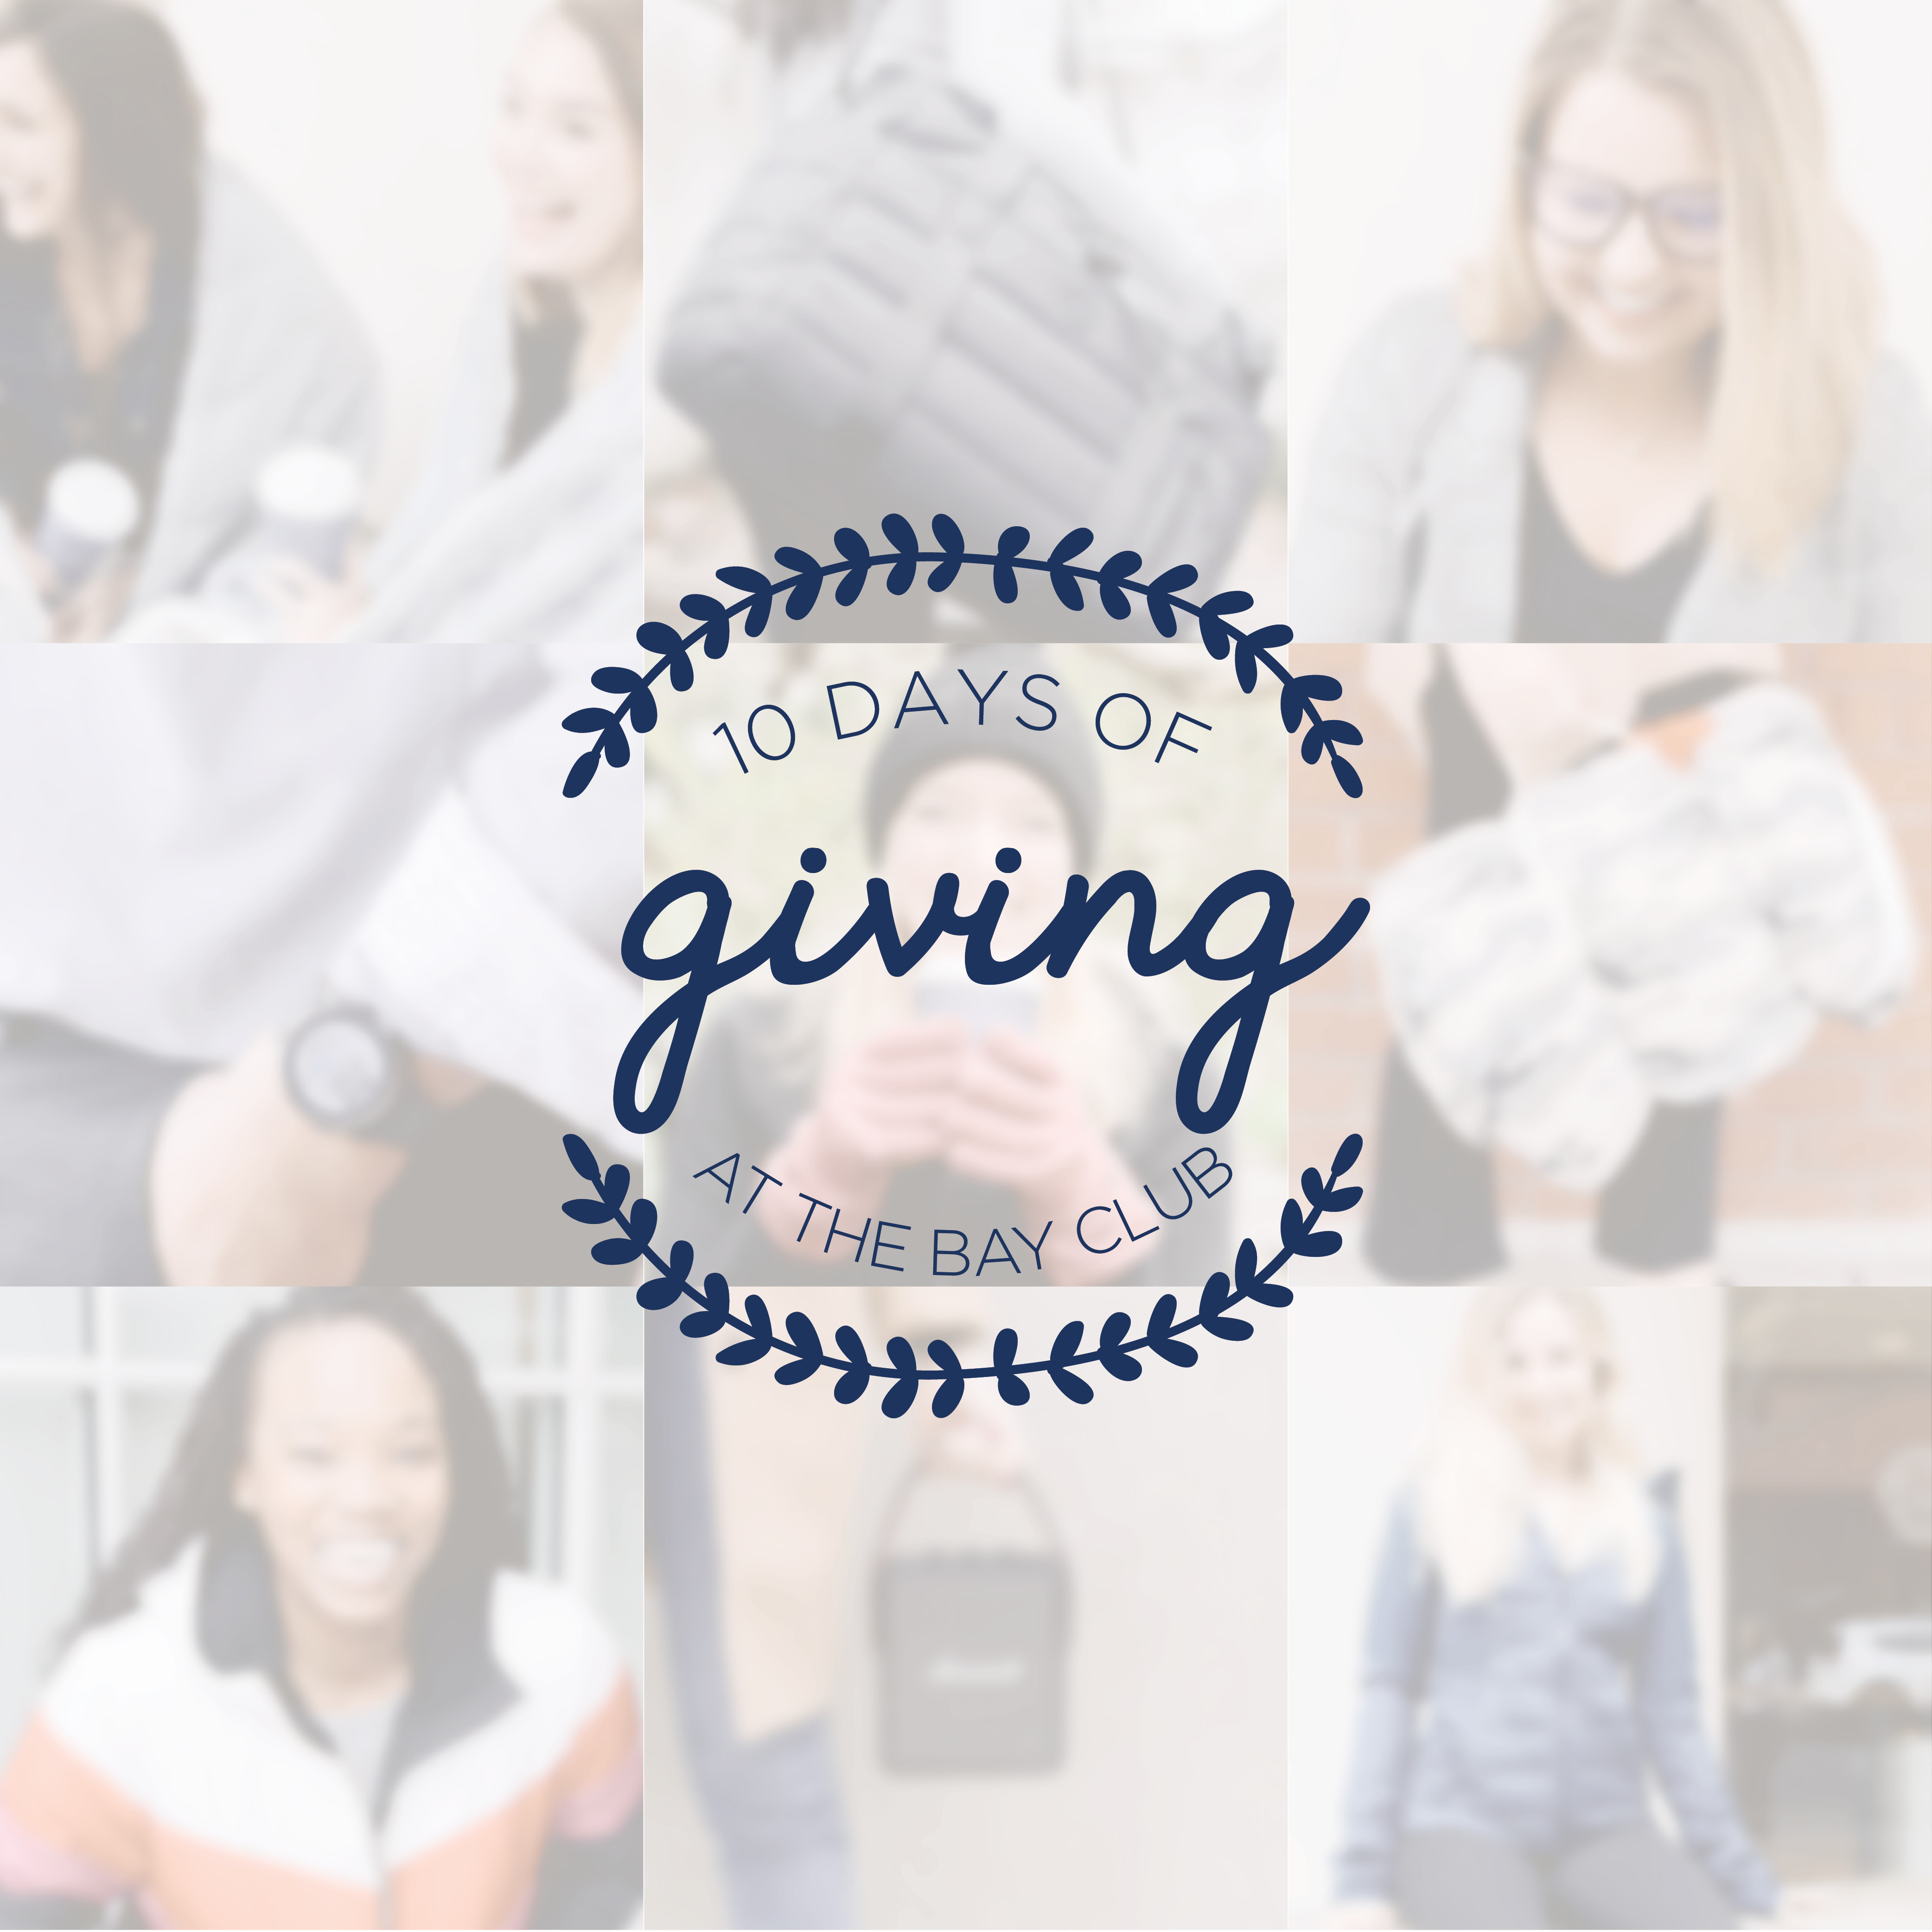 The 10 Days of Giving